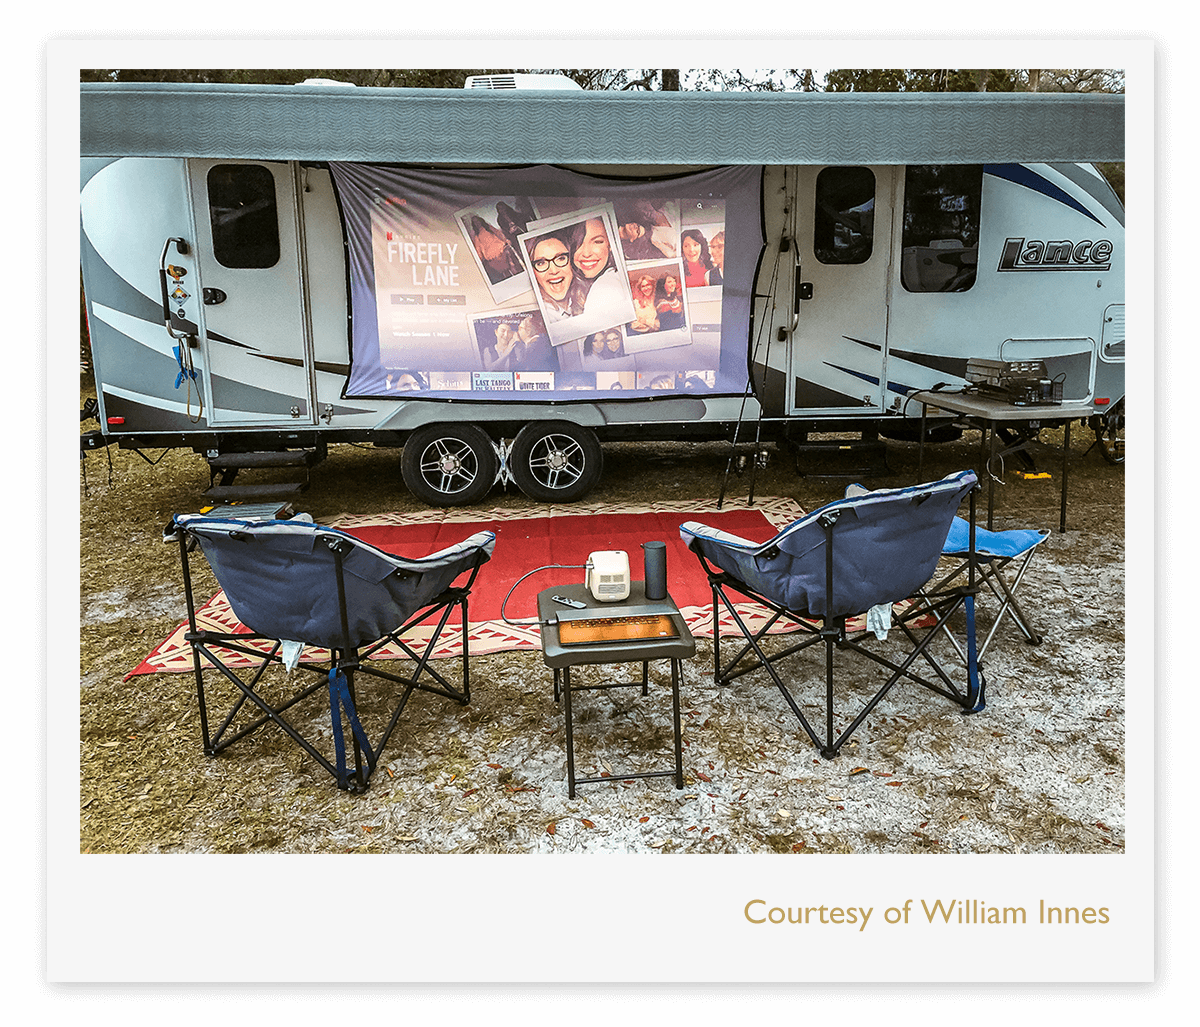 A portable projector displaying an image on the walls of a camper van